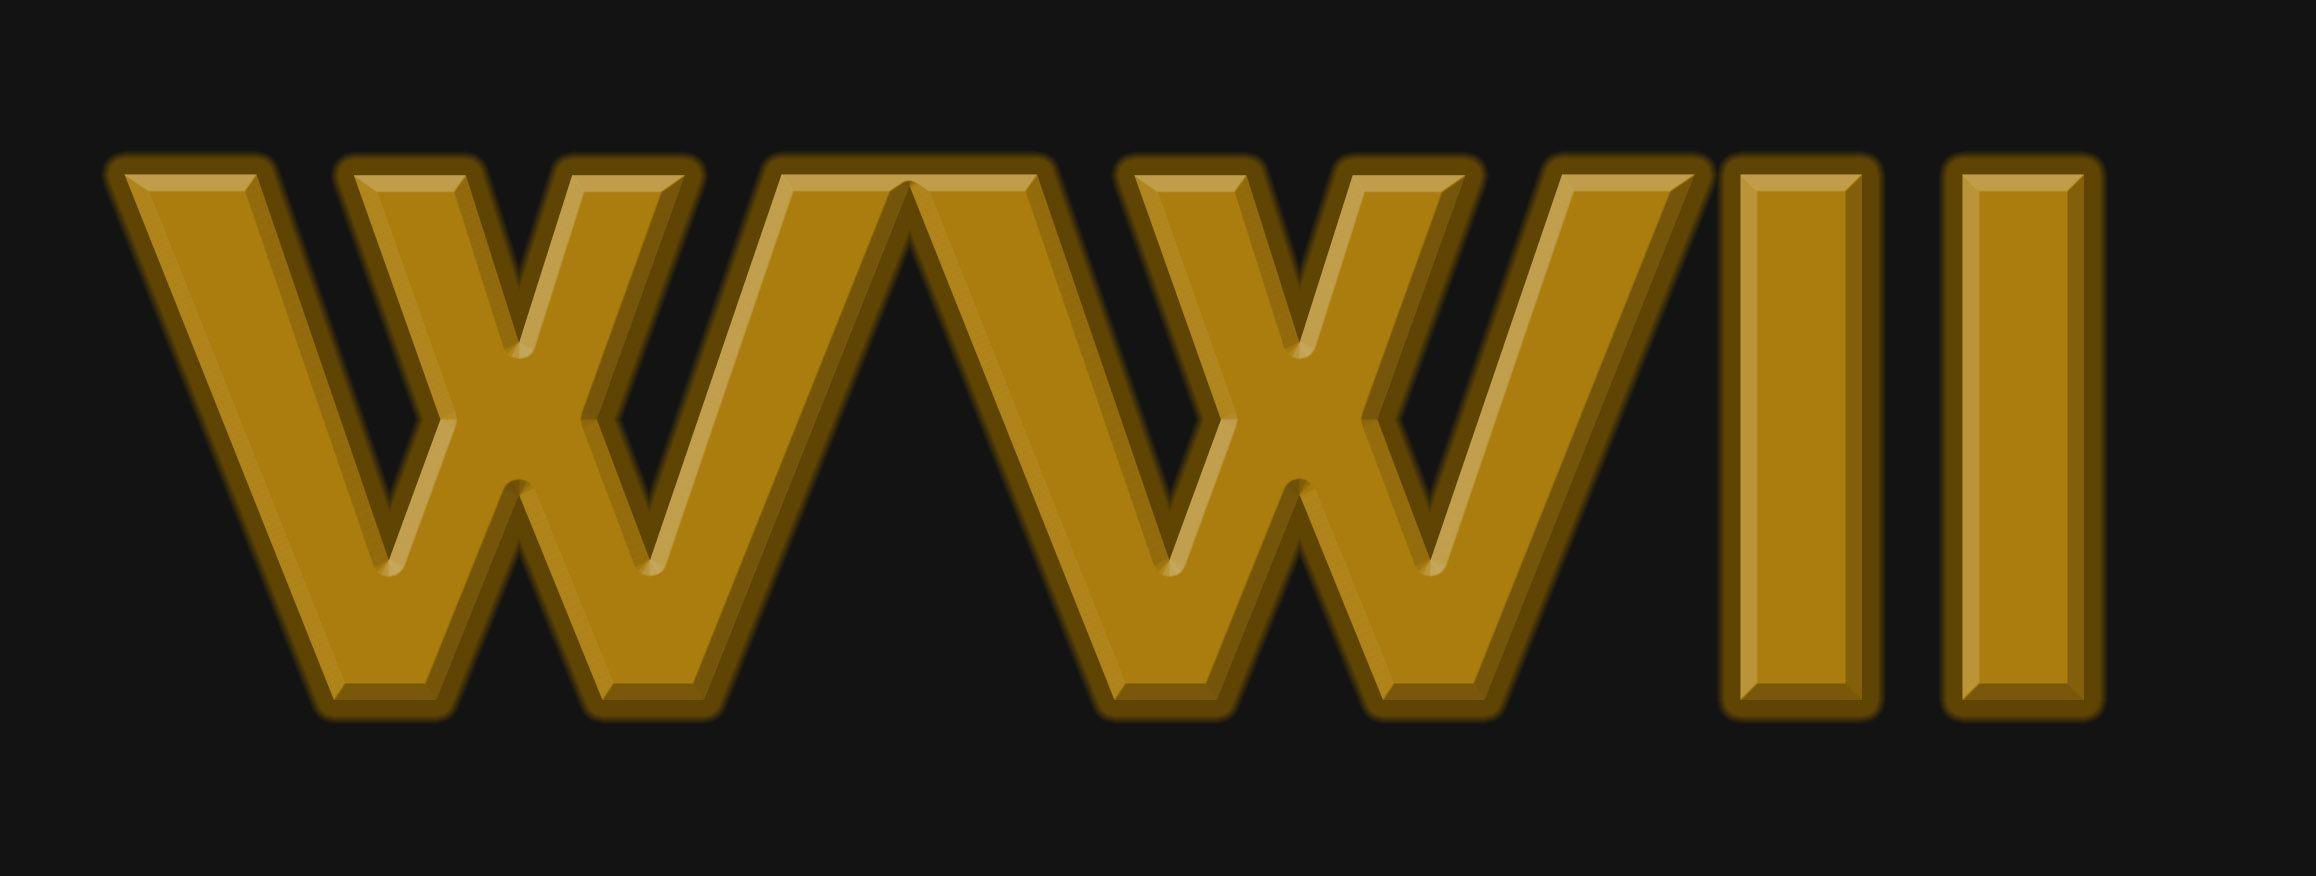 WWII Logo - Set Wonder Woman Sequel During World War II and use This Logo ...